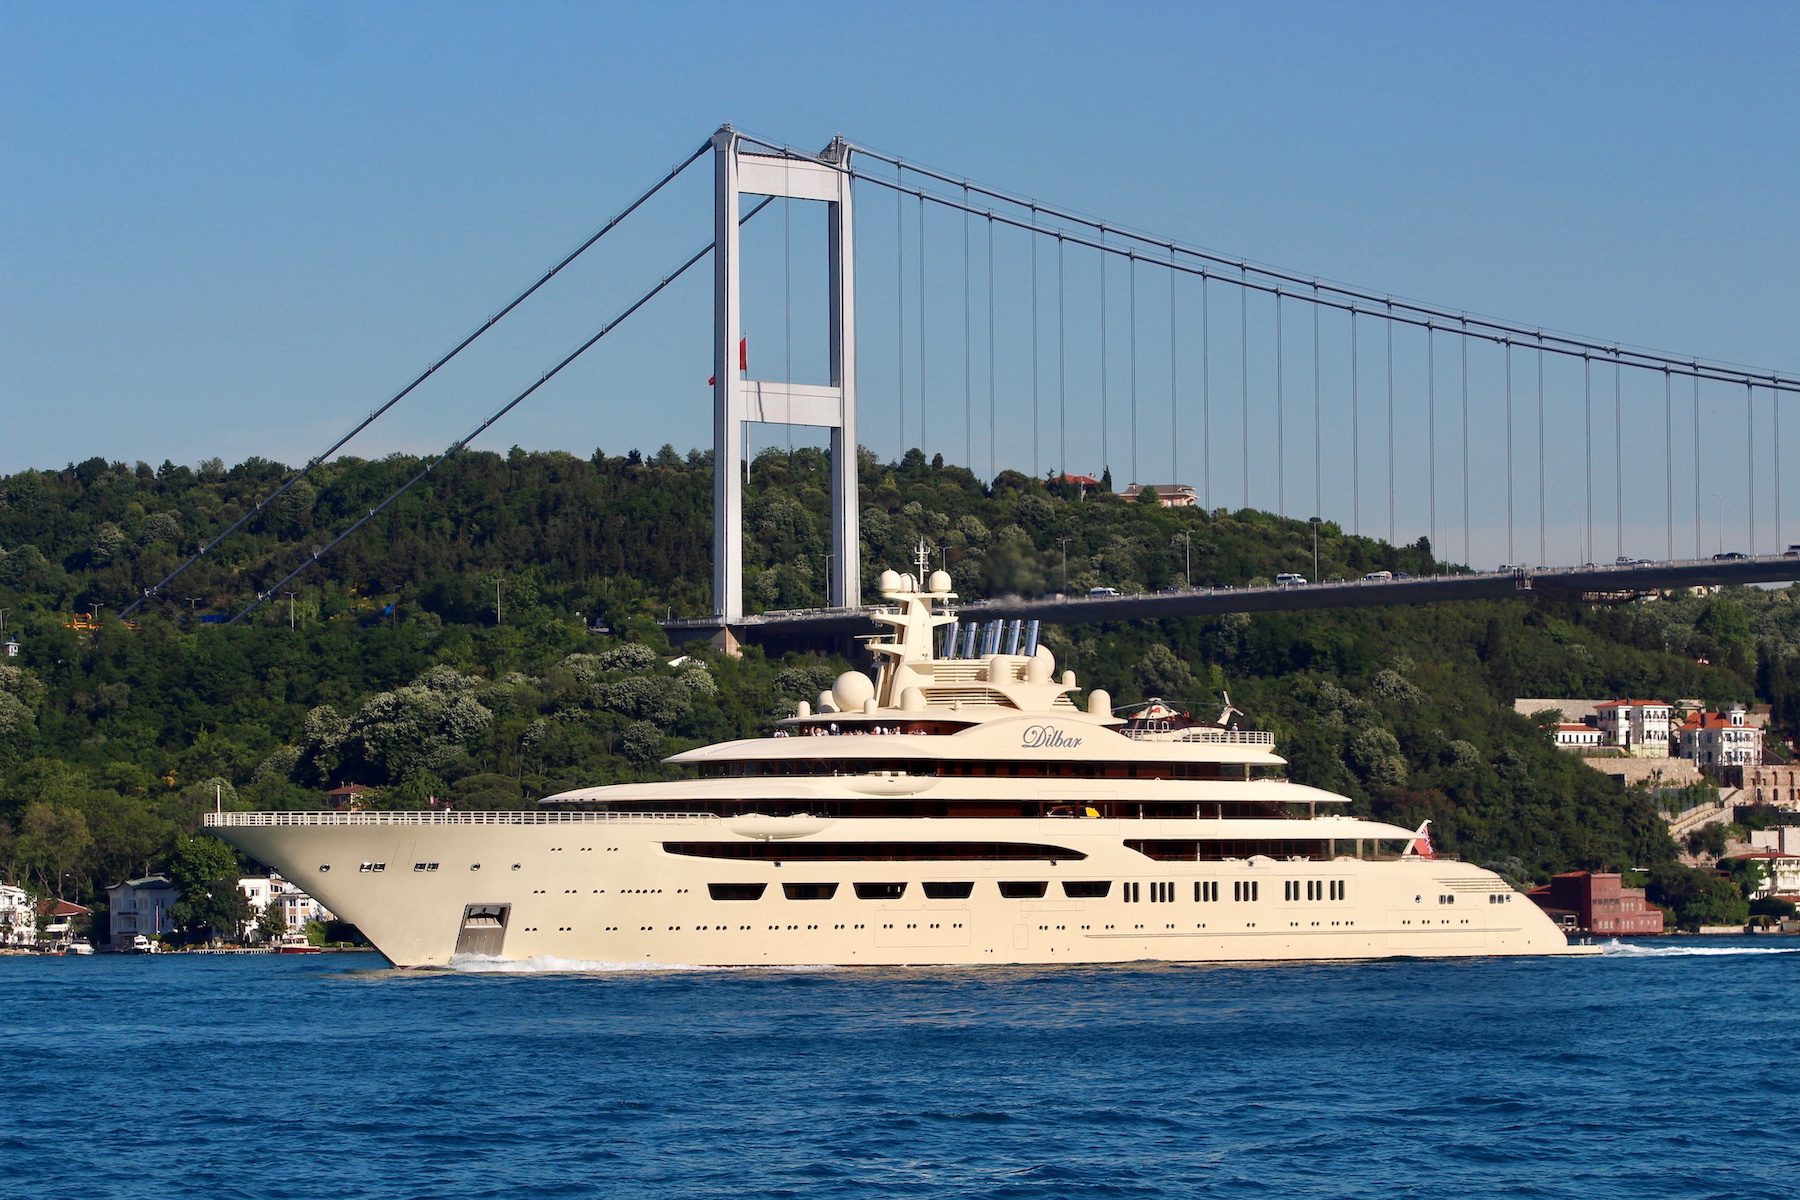 Russian oligarchs’ yachts seized in Europe, others harboring in Maldives